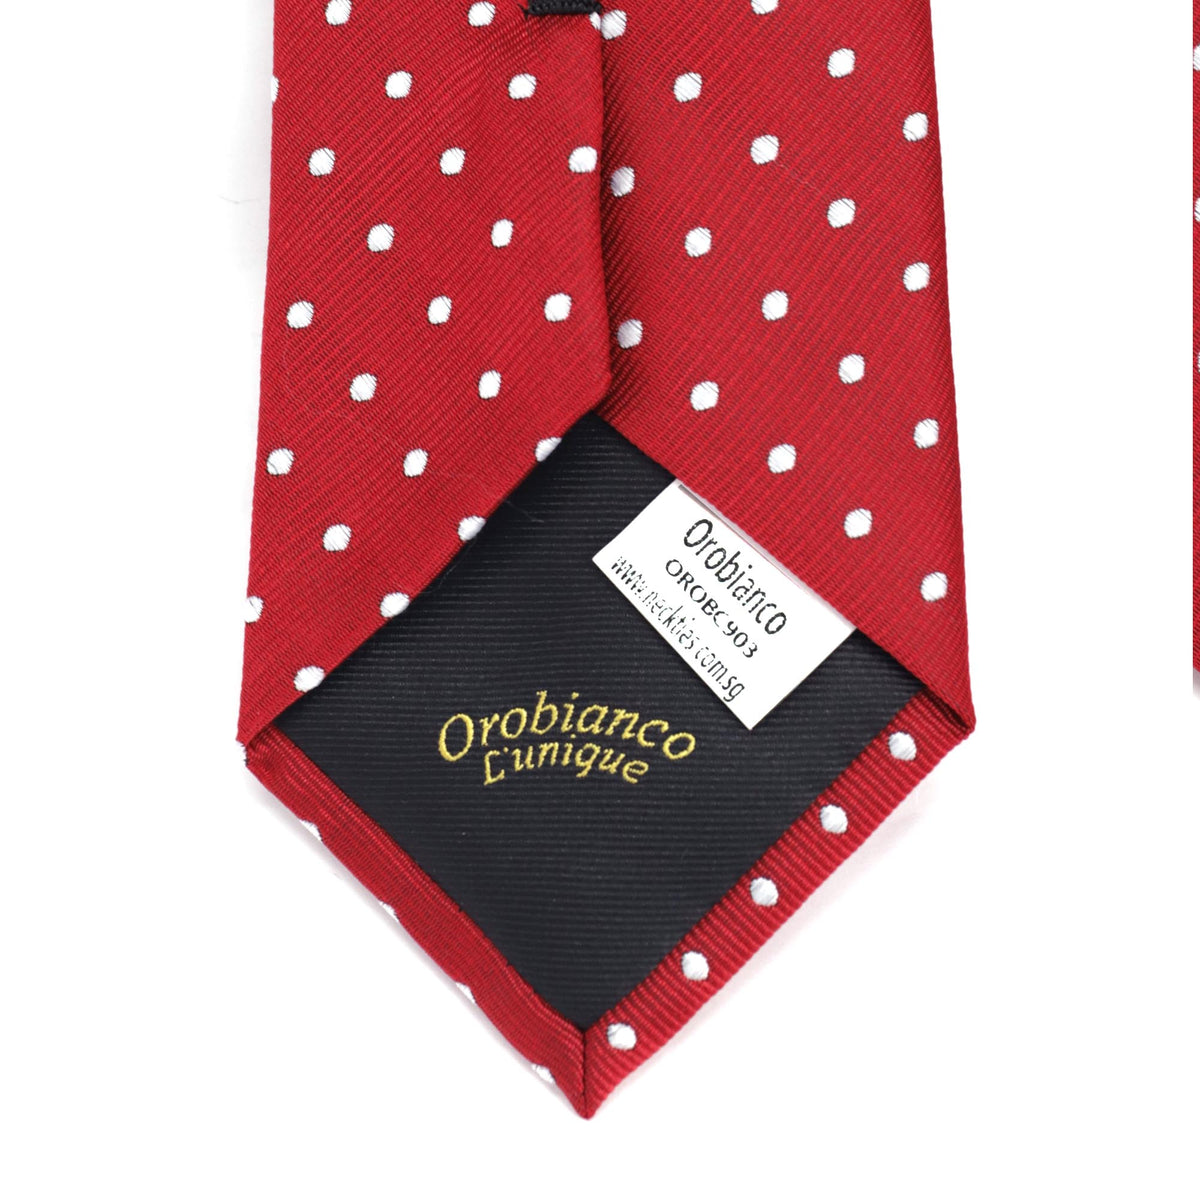 Red Necktie with White Dots